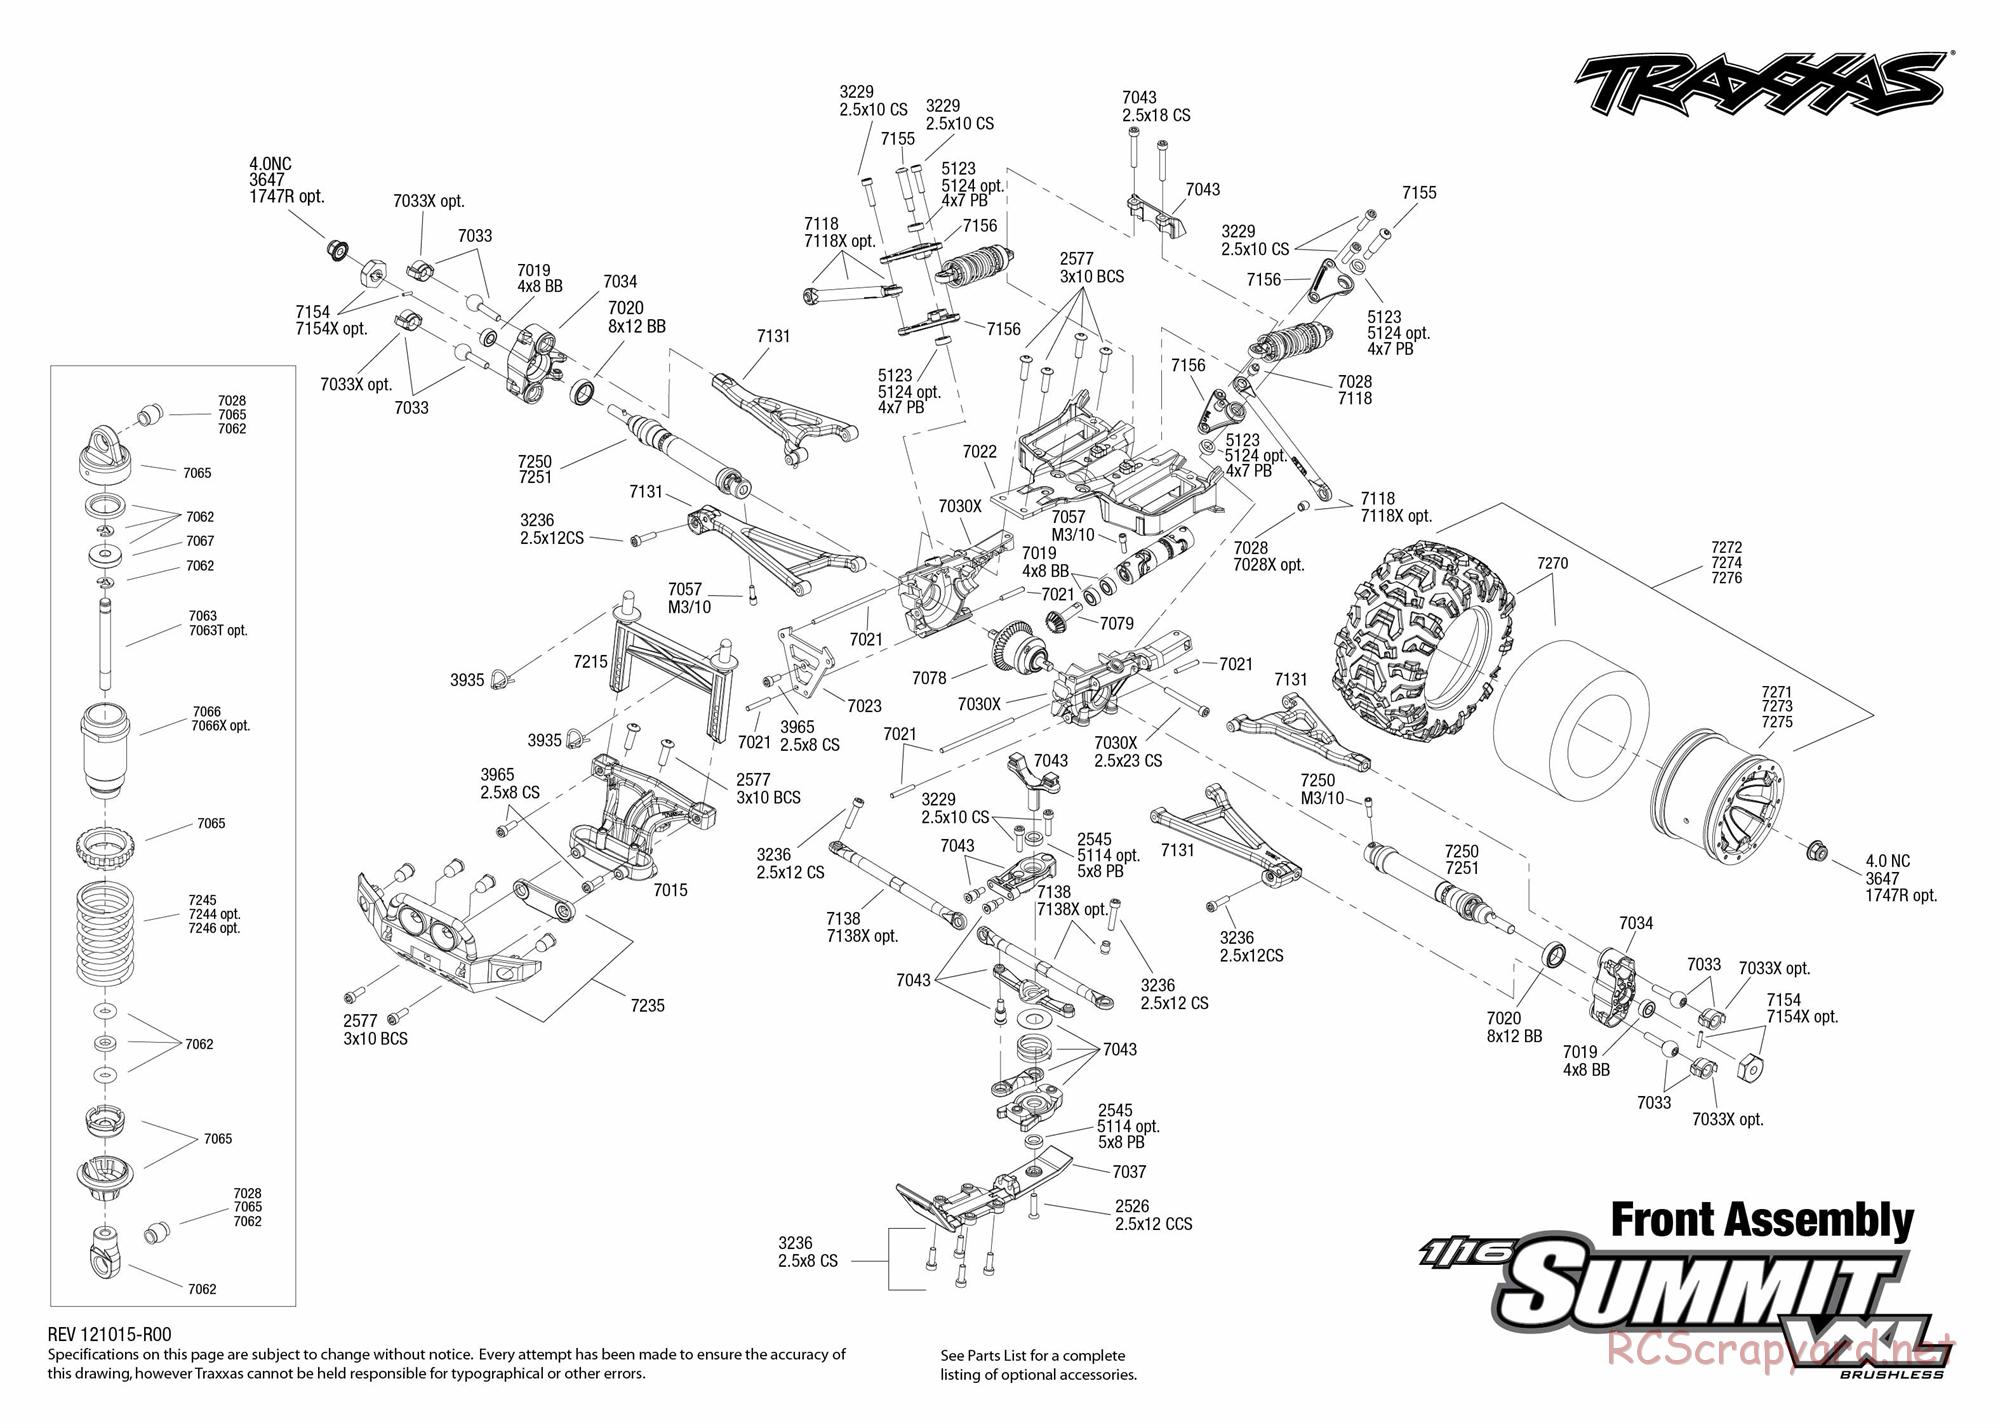 Traxxas - 1/16 Summit VXL (2012) - Exploded Views - Page 3